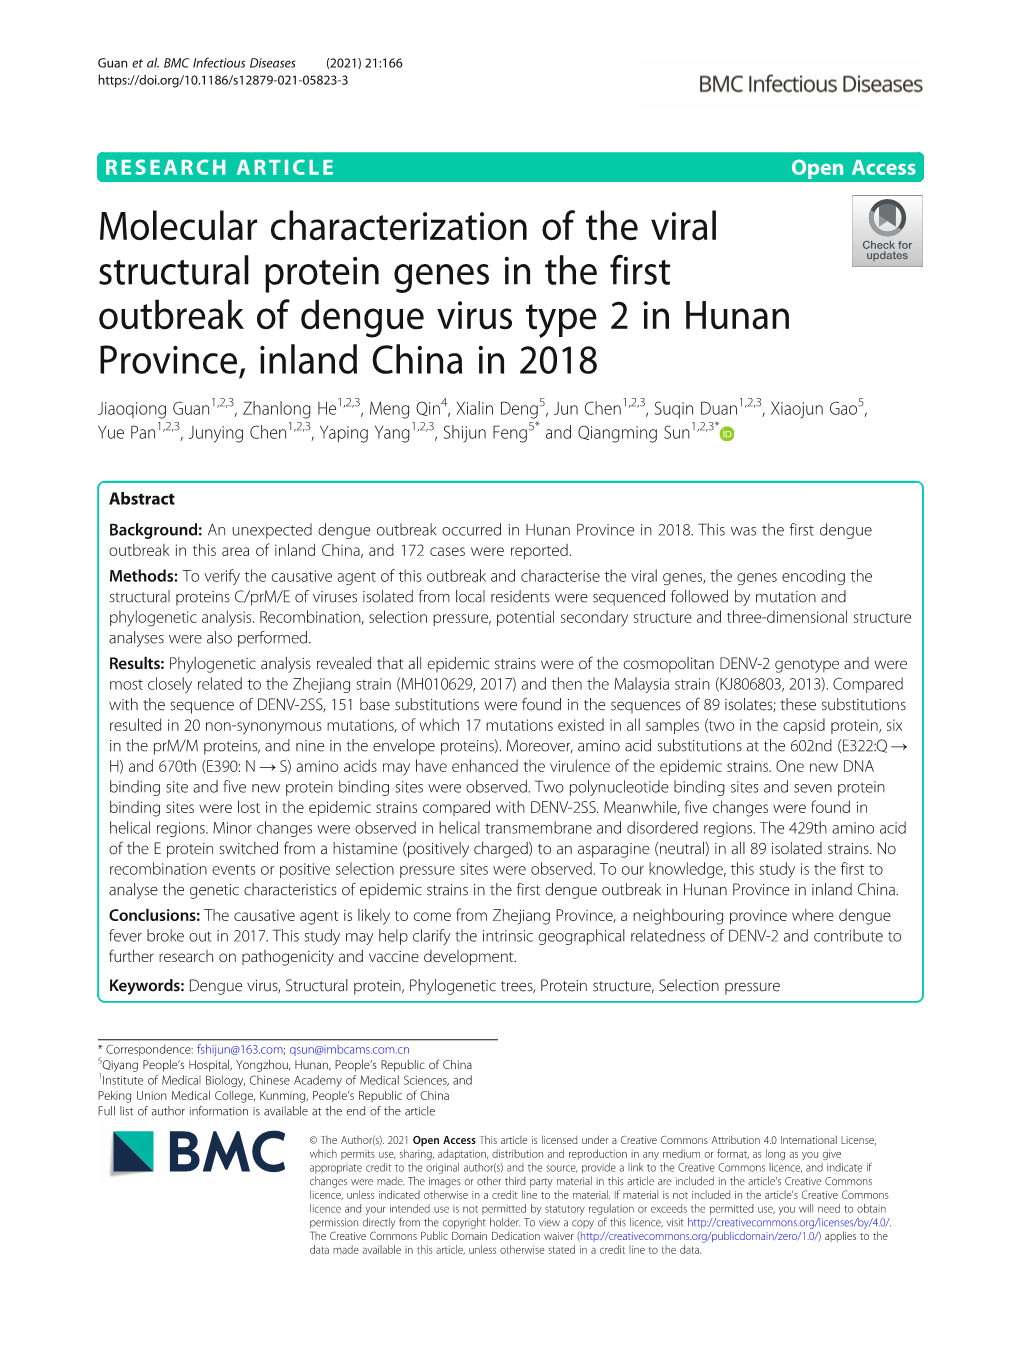 Molecular Characterization of the Viral Structural Protein Genes in the First Outbreak of Dengue Virus Type 2 in Hunan Province